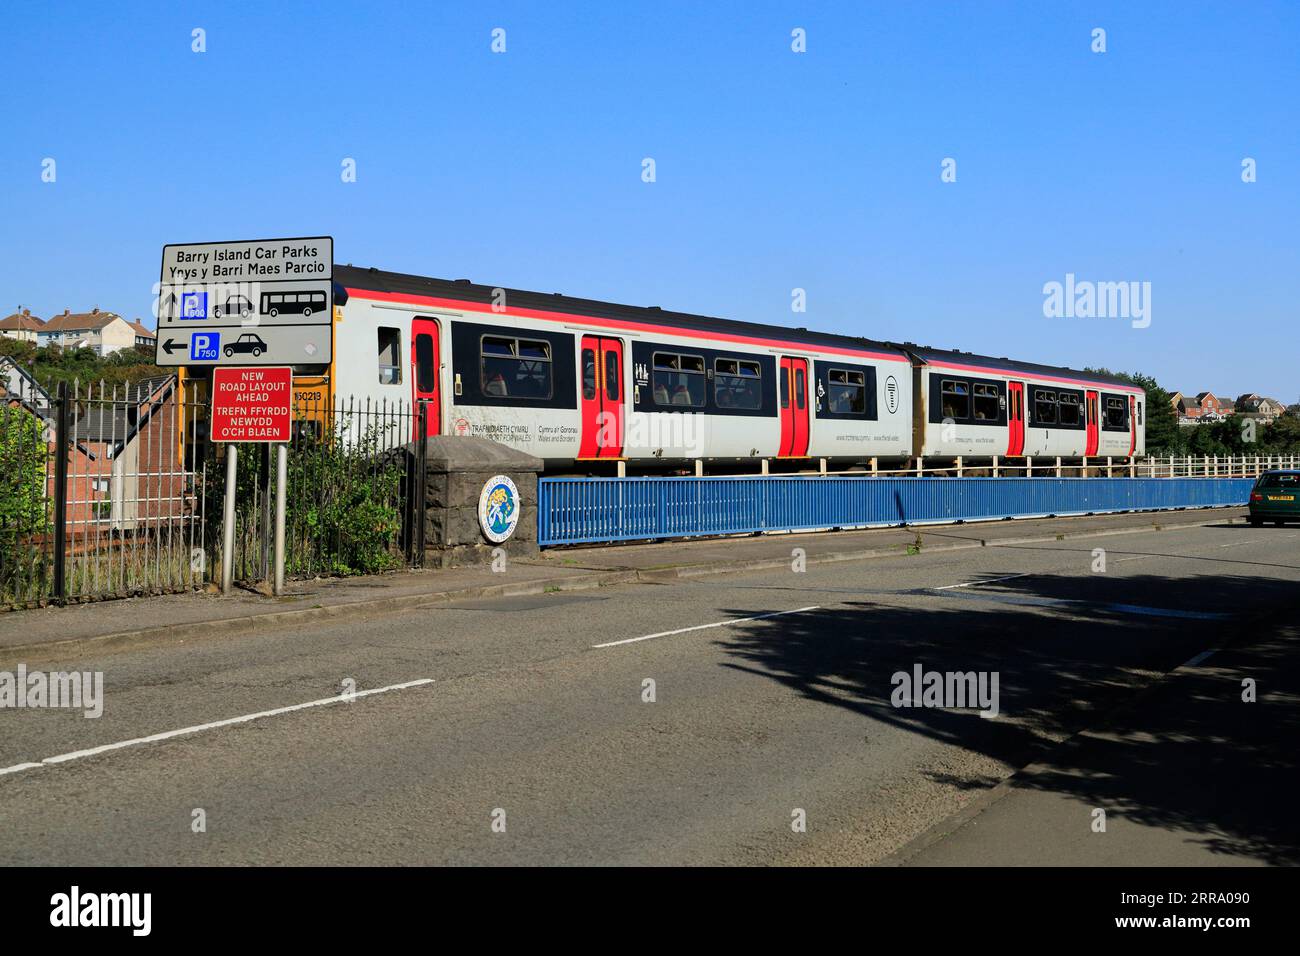 Transport for Wales Train, Barry Island, Vale of Glamorgan, South Wales, UK. Stock Photo